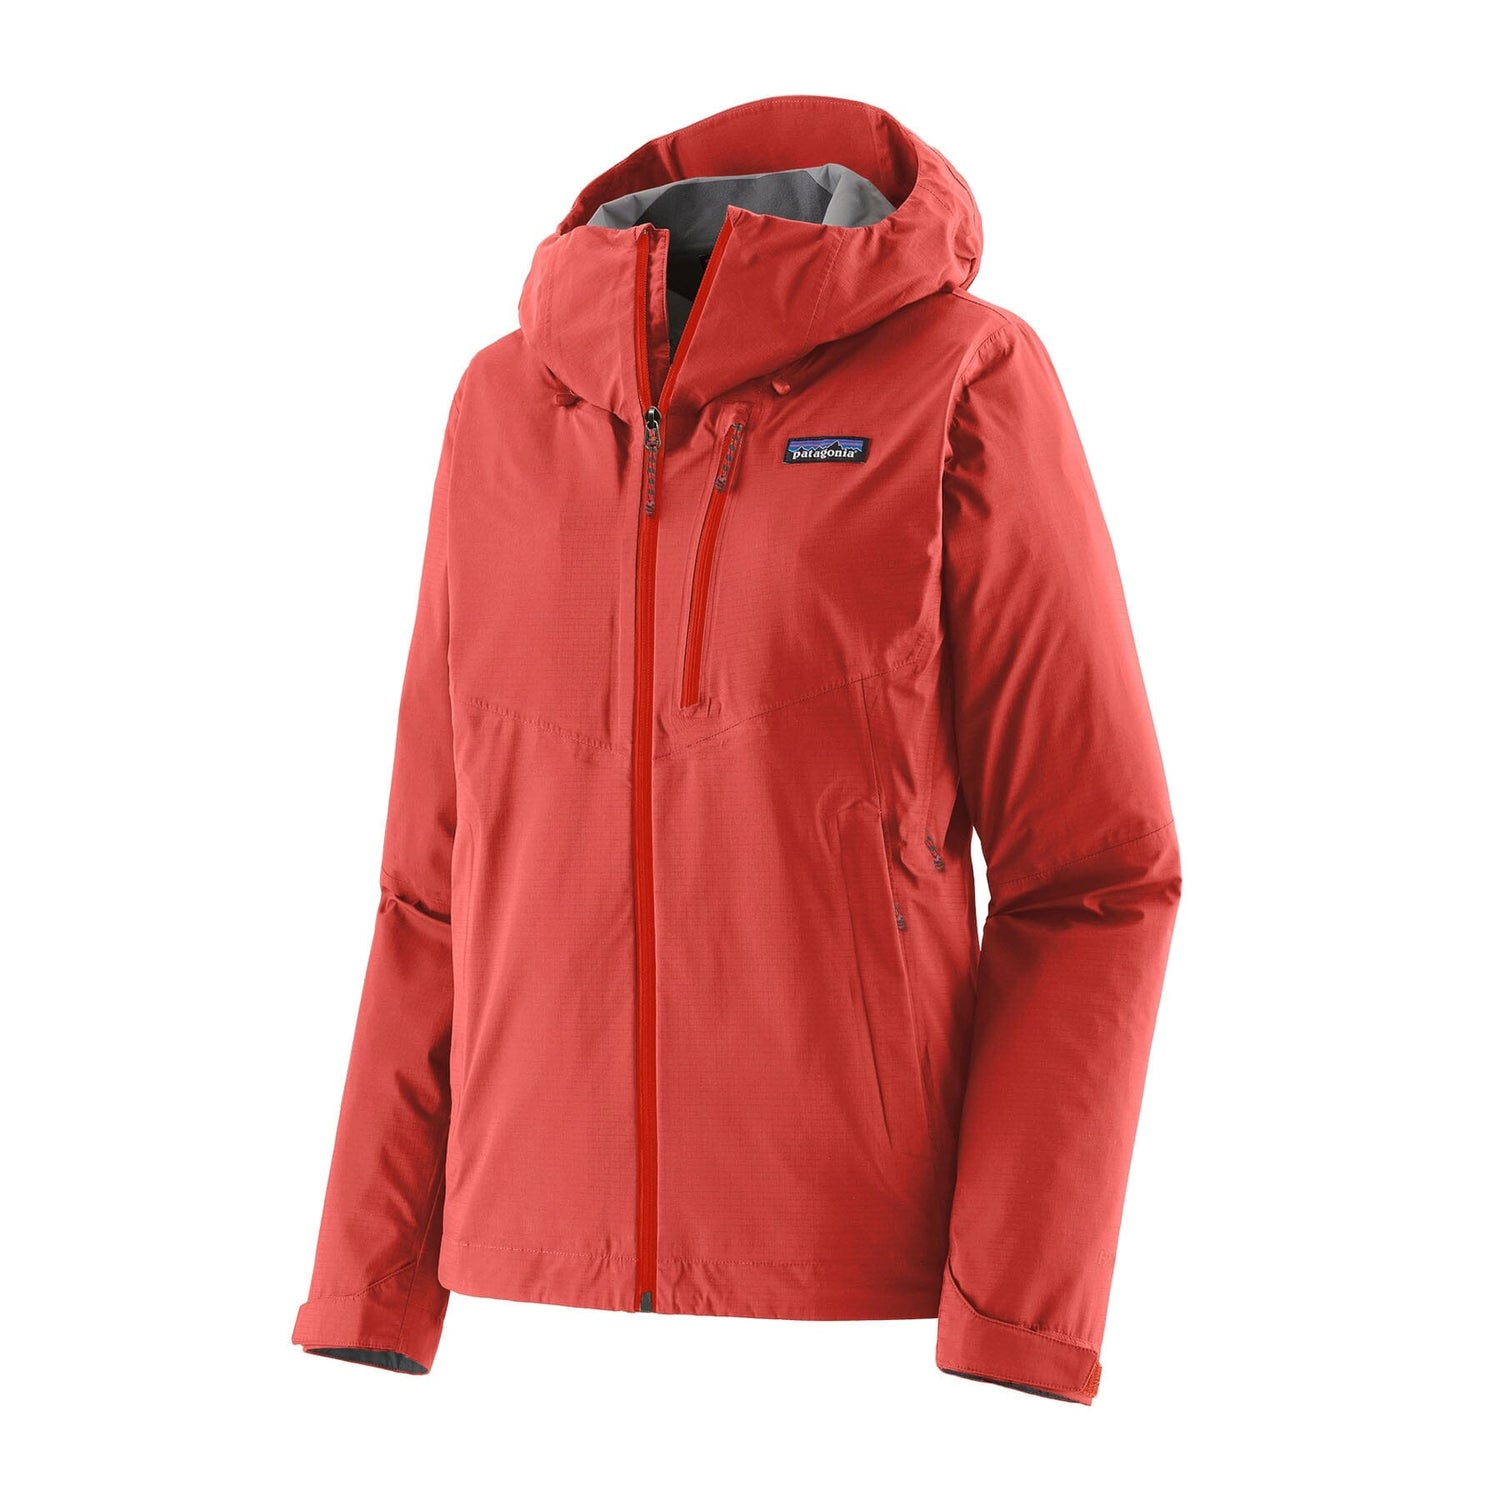 Patagonia W's Granite Crest Shell Jacket - 100% Recycled Nylon Pimento Red Jacket